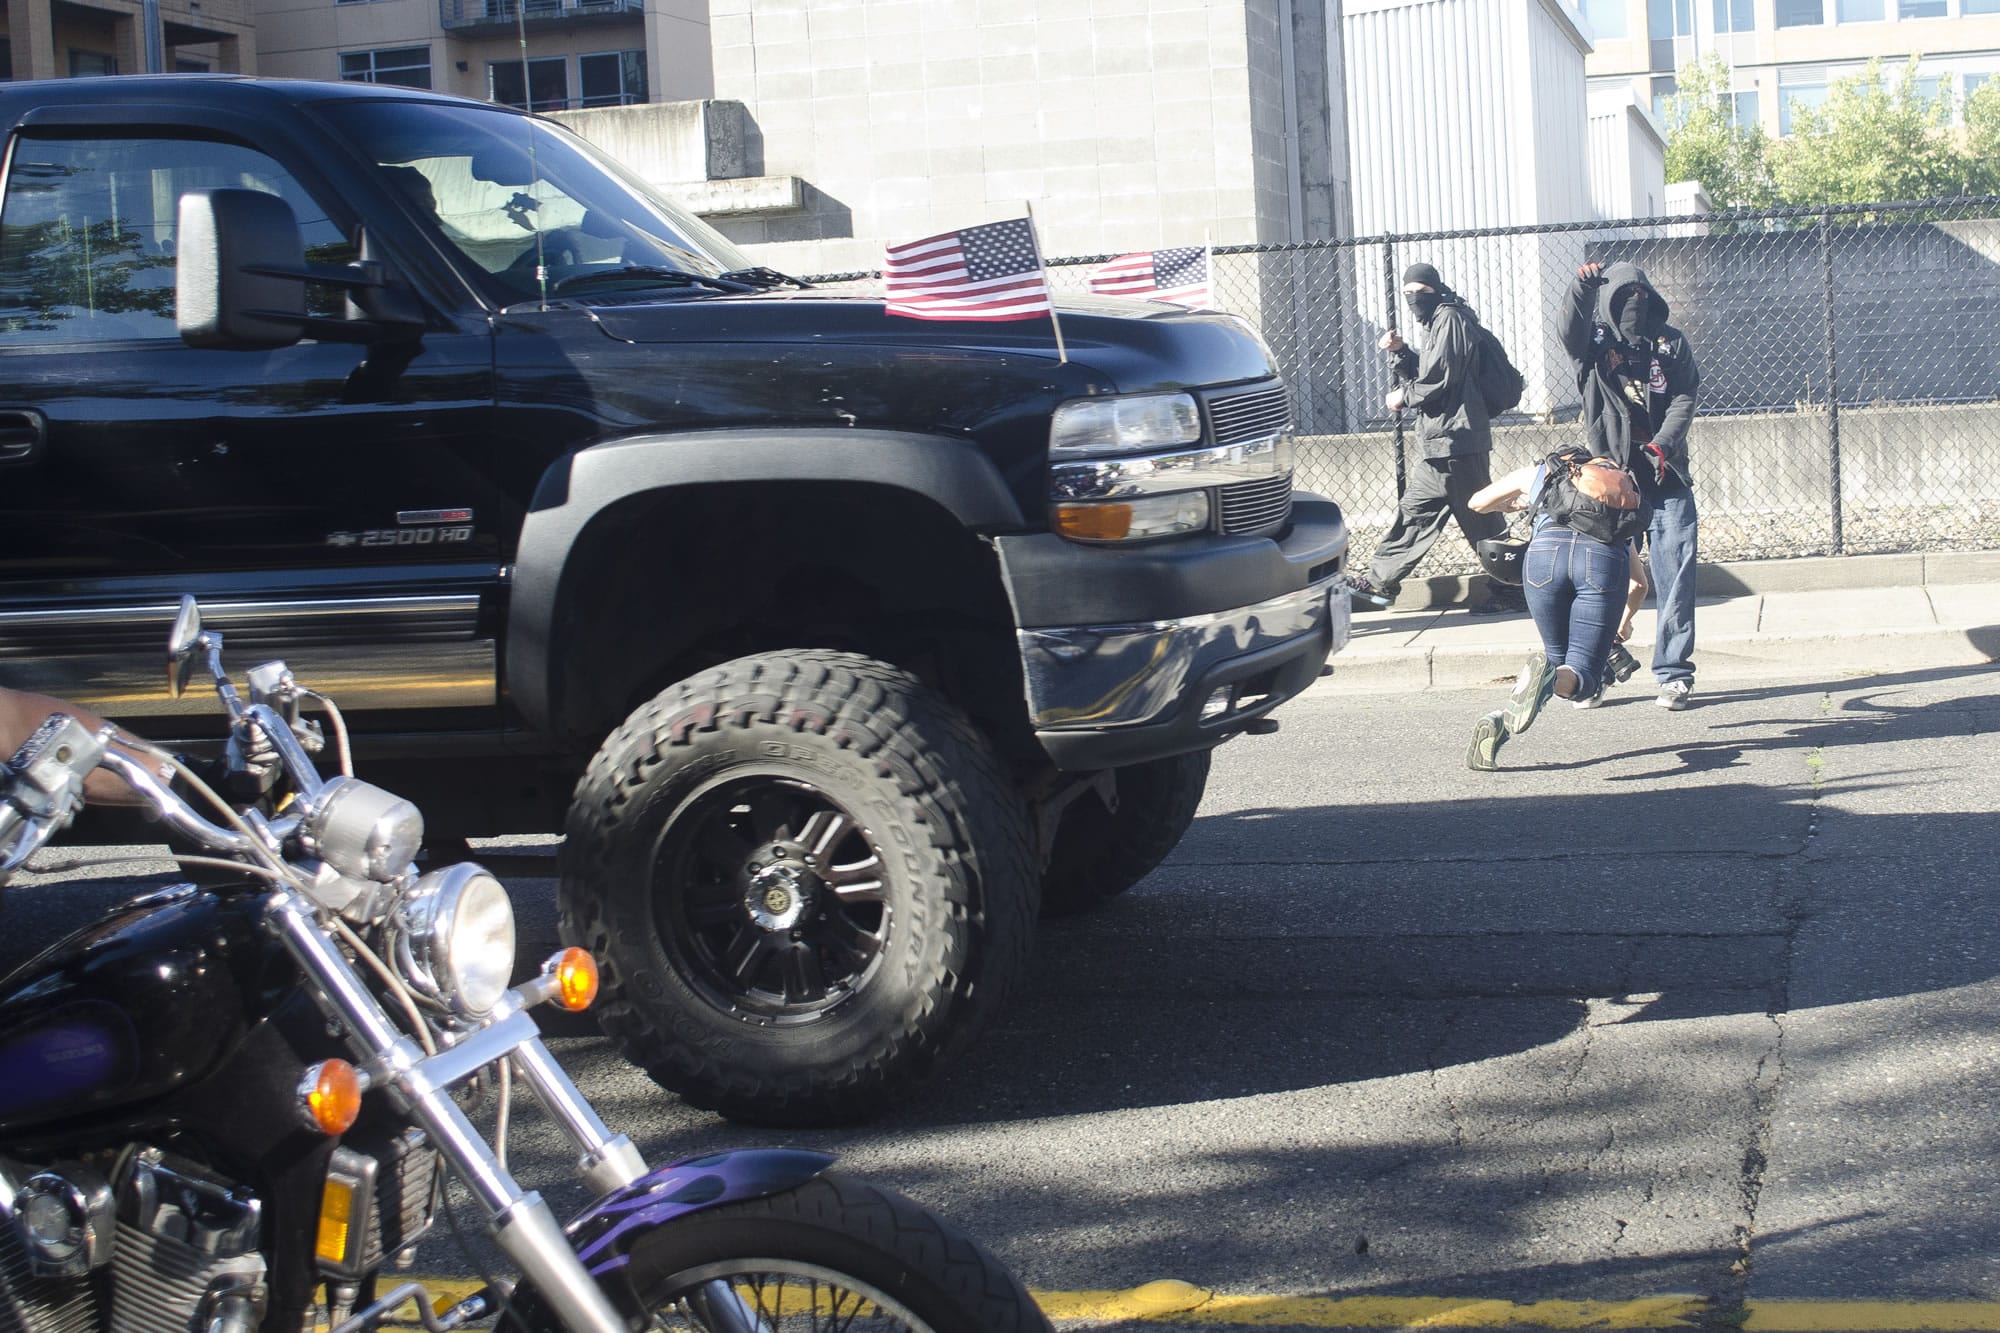 A photographer dives out of the way of a truck after a rally held by Joey Gibson's Patriot Prayer Group in Vancouver on Sunday. The event was moved to Vancouver from Portland in an attempt to avoid protesters.